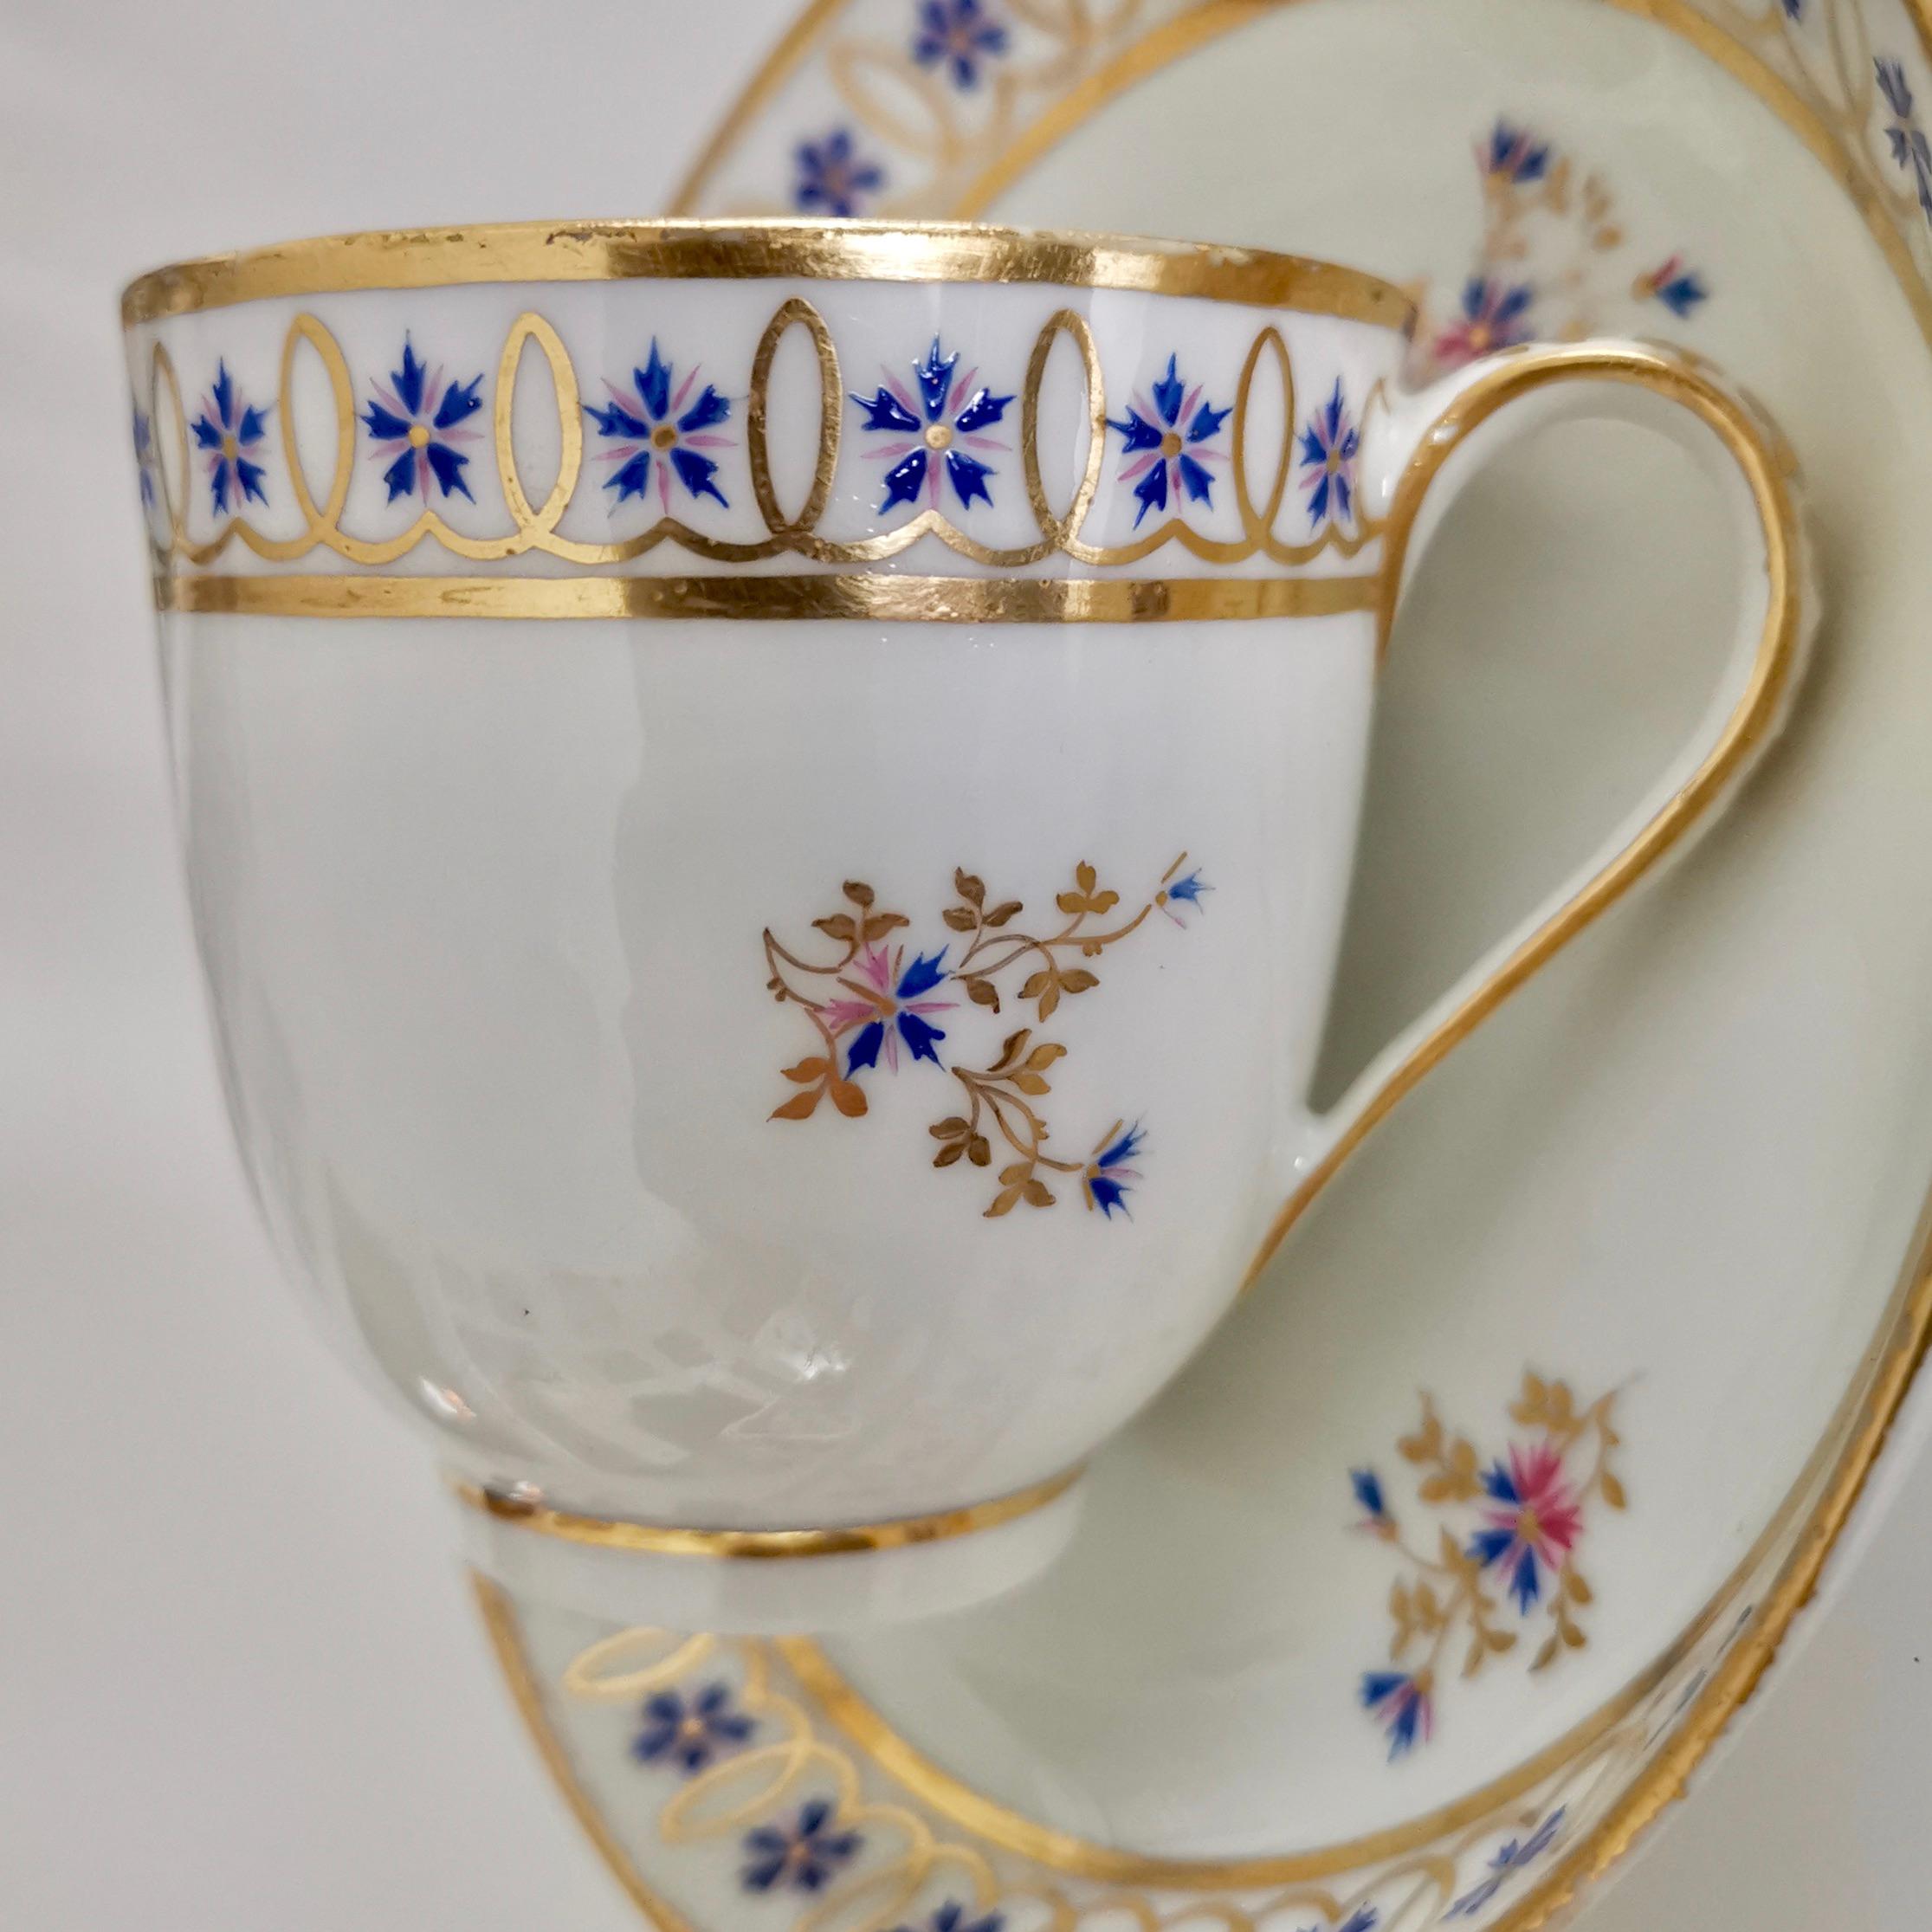 Crown Derby Porcelain Coffee Cup, White, Gilt with Blue Cornflowers, 1782-1790 1